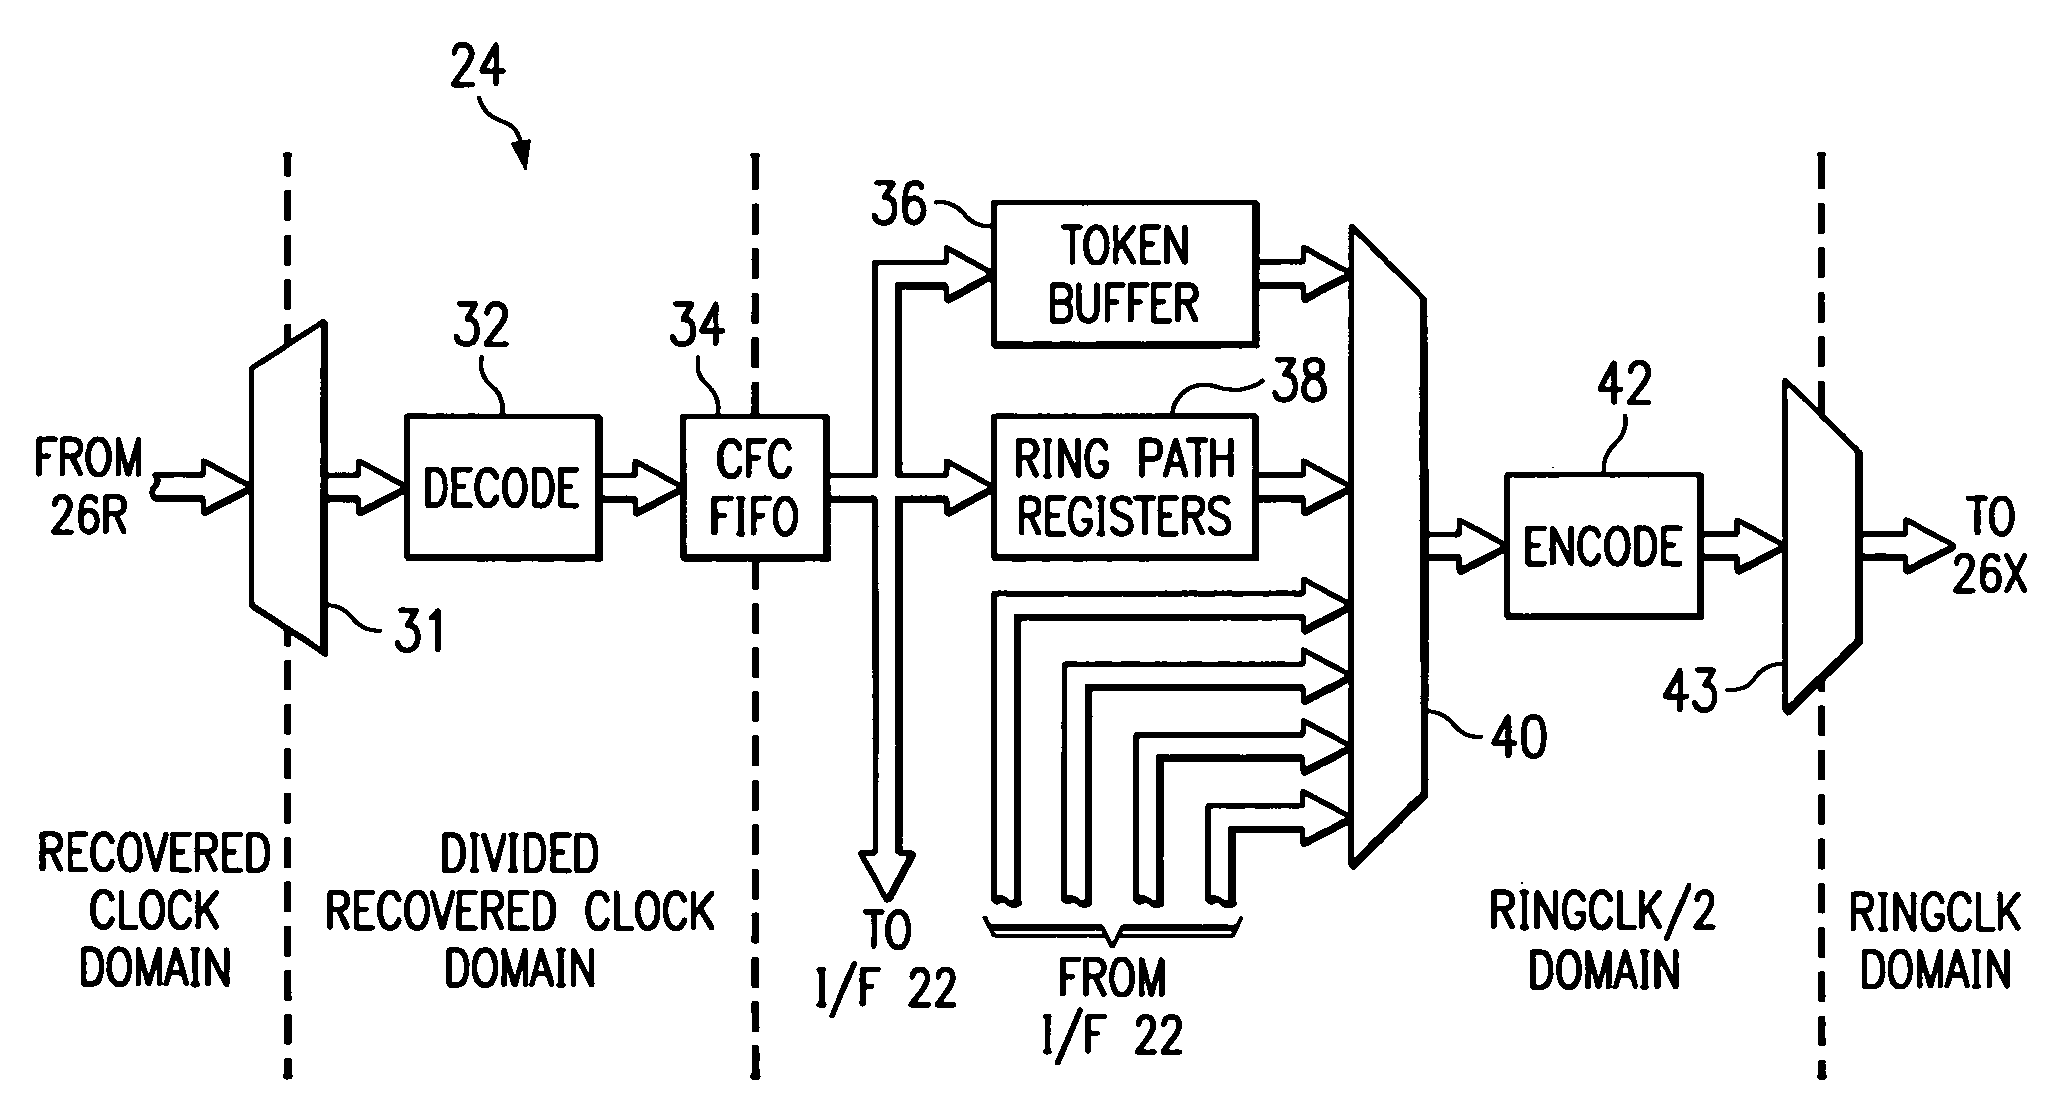 Communications interface between clock domains with minimal latency